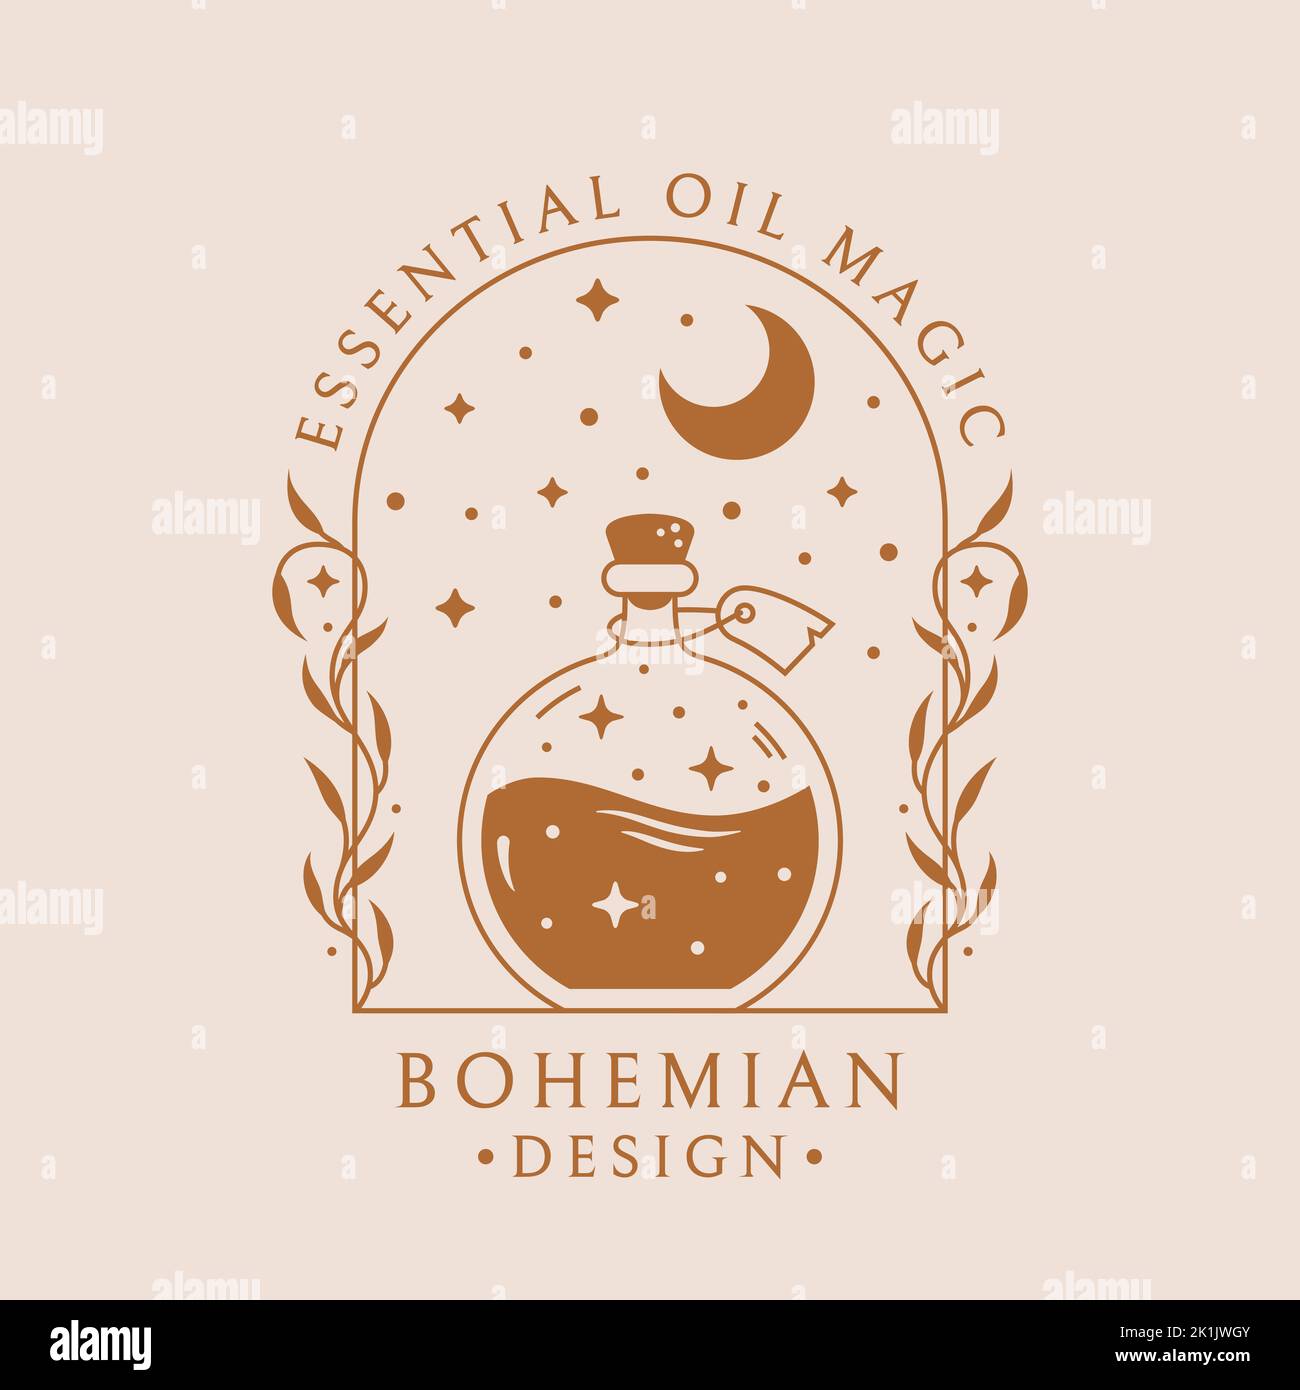 Magic potion logo template. Vector emblem for essential oils, aromatherapy, natural homemade perfume, botanical healing, homeopathy, etc. Stock Vector